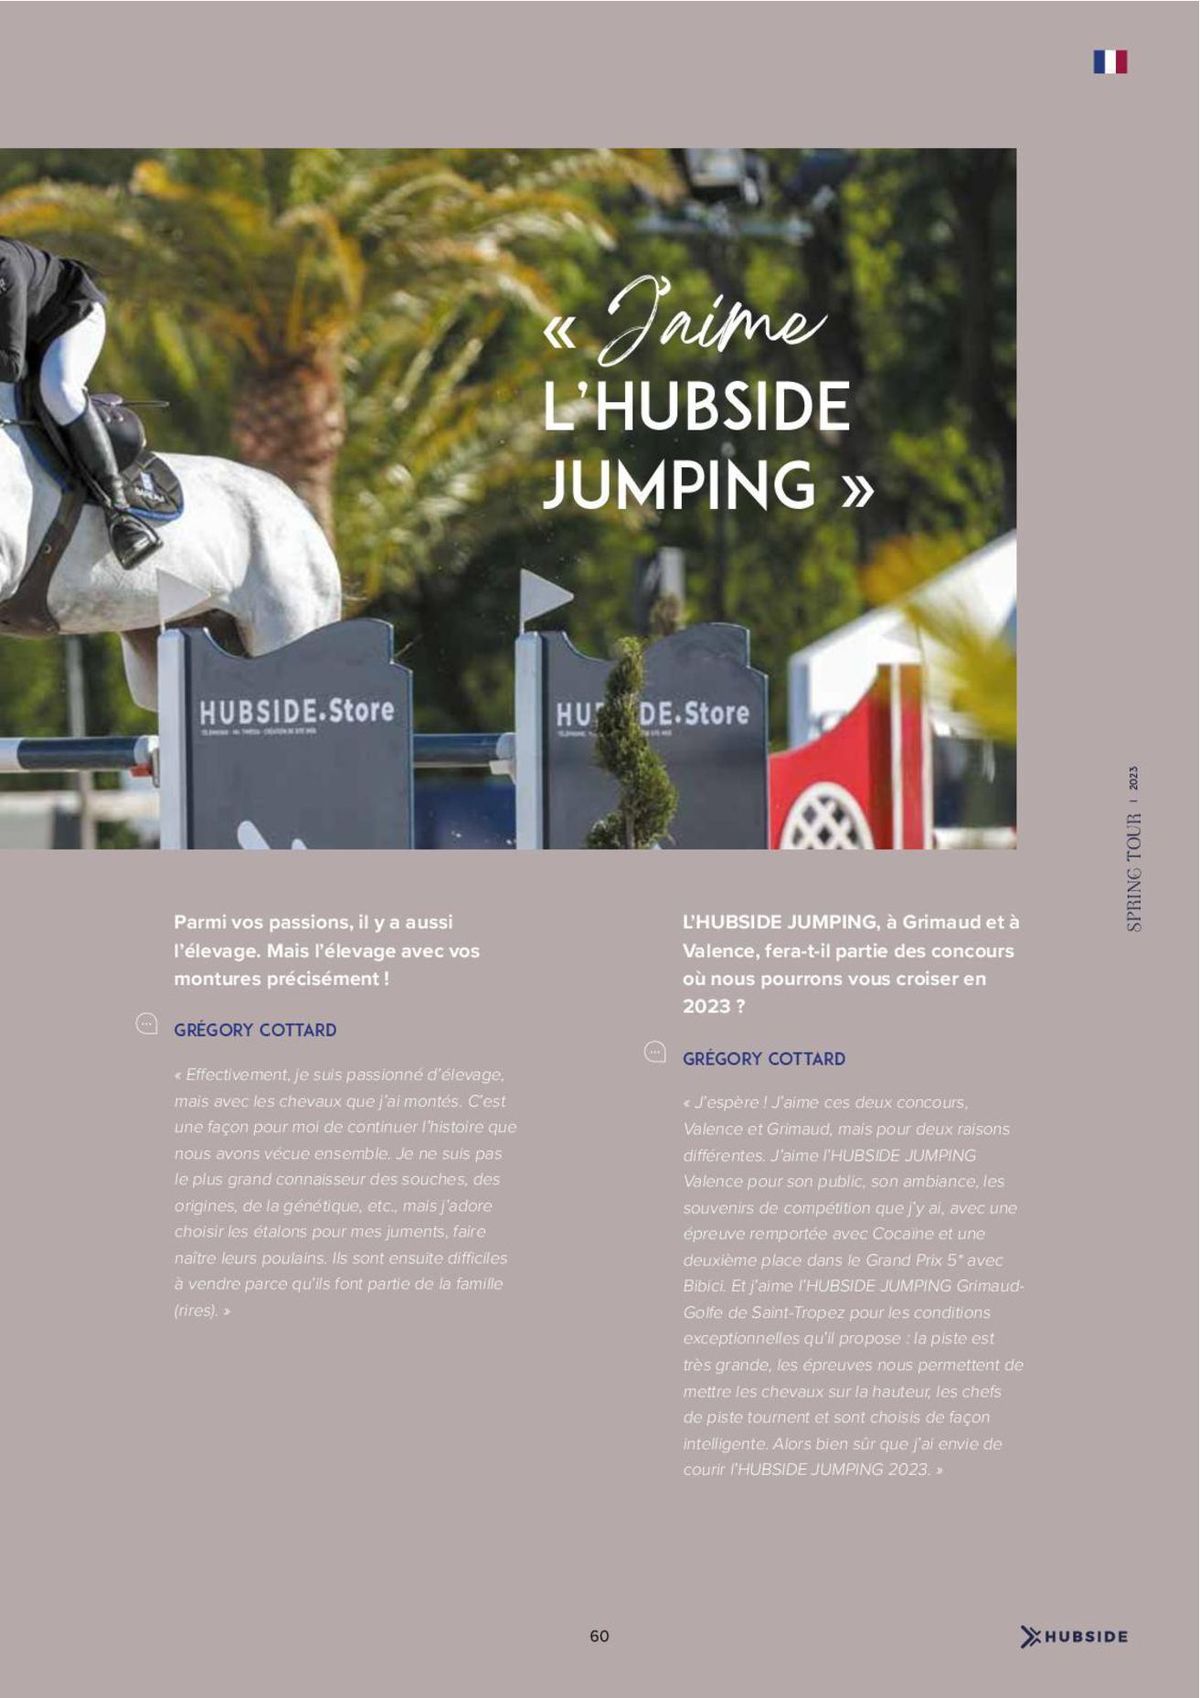 Catalogue Magazine HUBSIDE jumping Grimaud Spring Tour 2023, page 00061